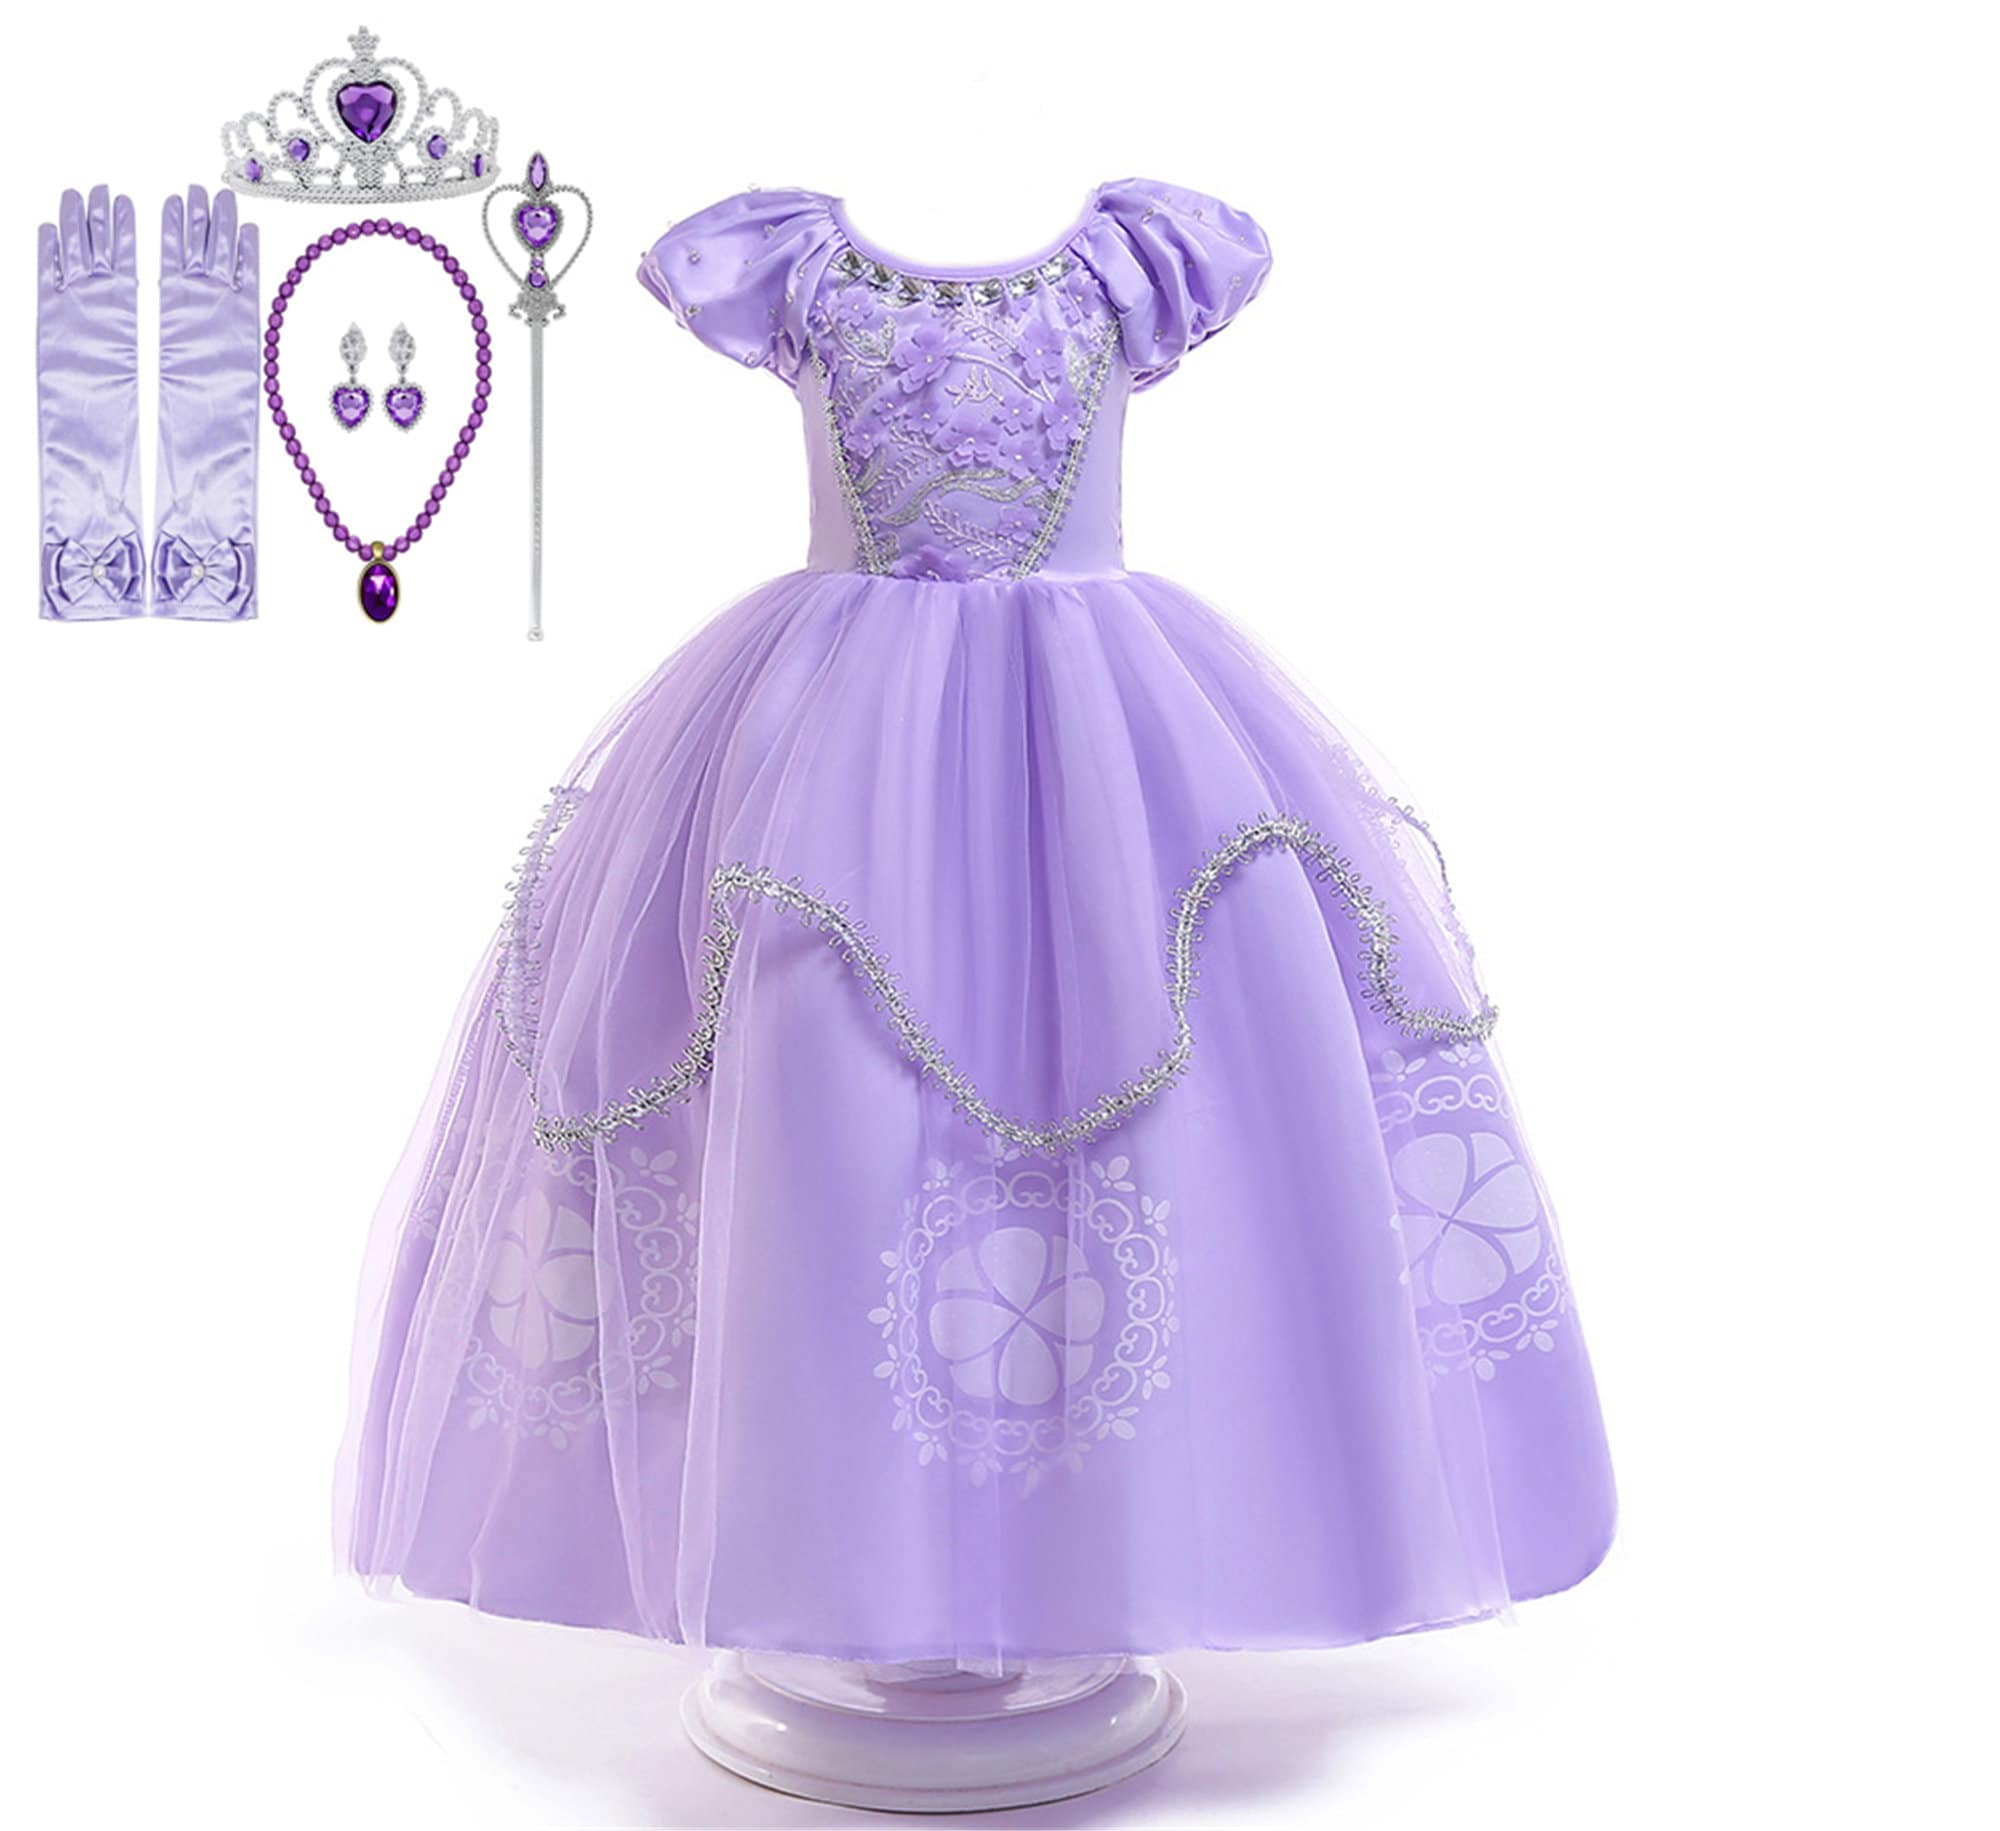 Sofia the First birthday outfit Princess by MiaMonroeBoutique, $50.00   Sofia the first birthday party, Princess sofia party, Birthday parties